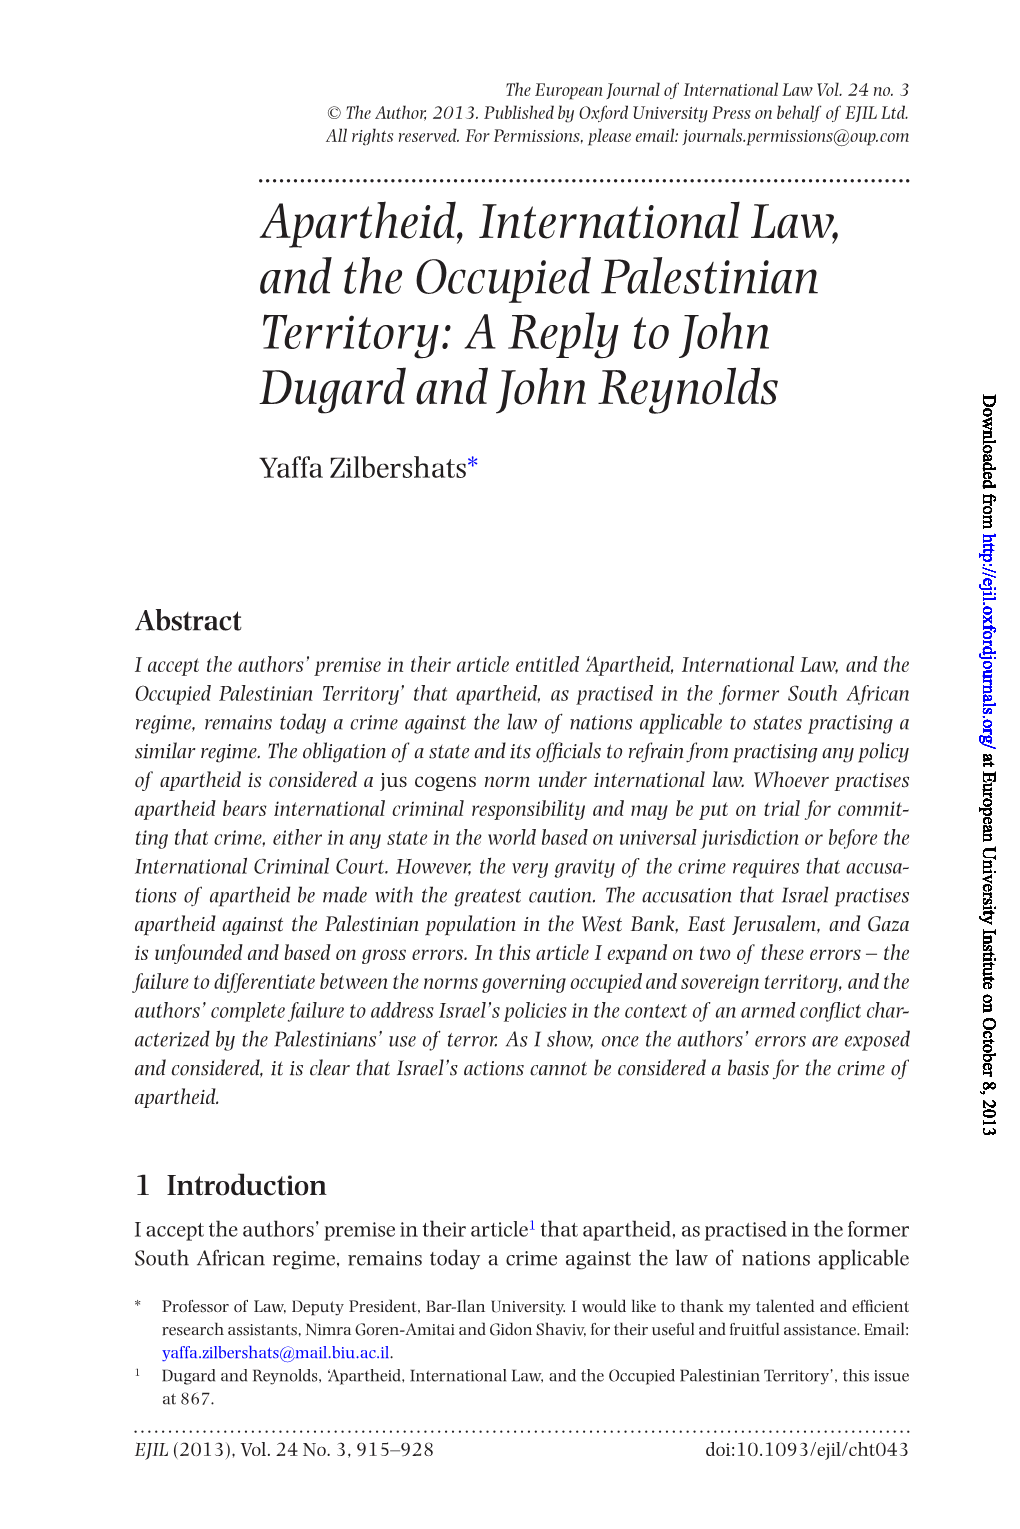 Apartheid, International Law, and the Occupied Palestinian Territory: a Reply to John